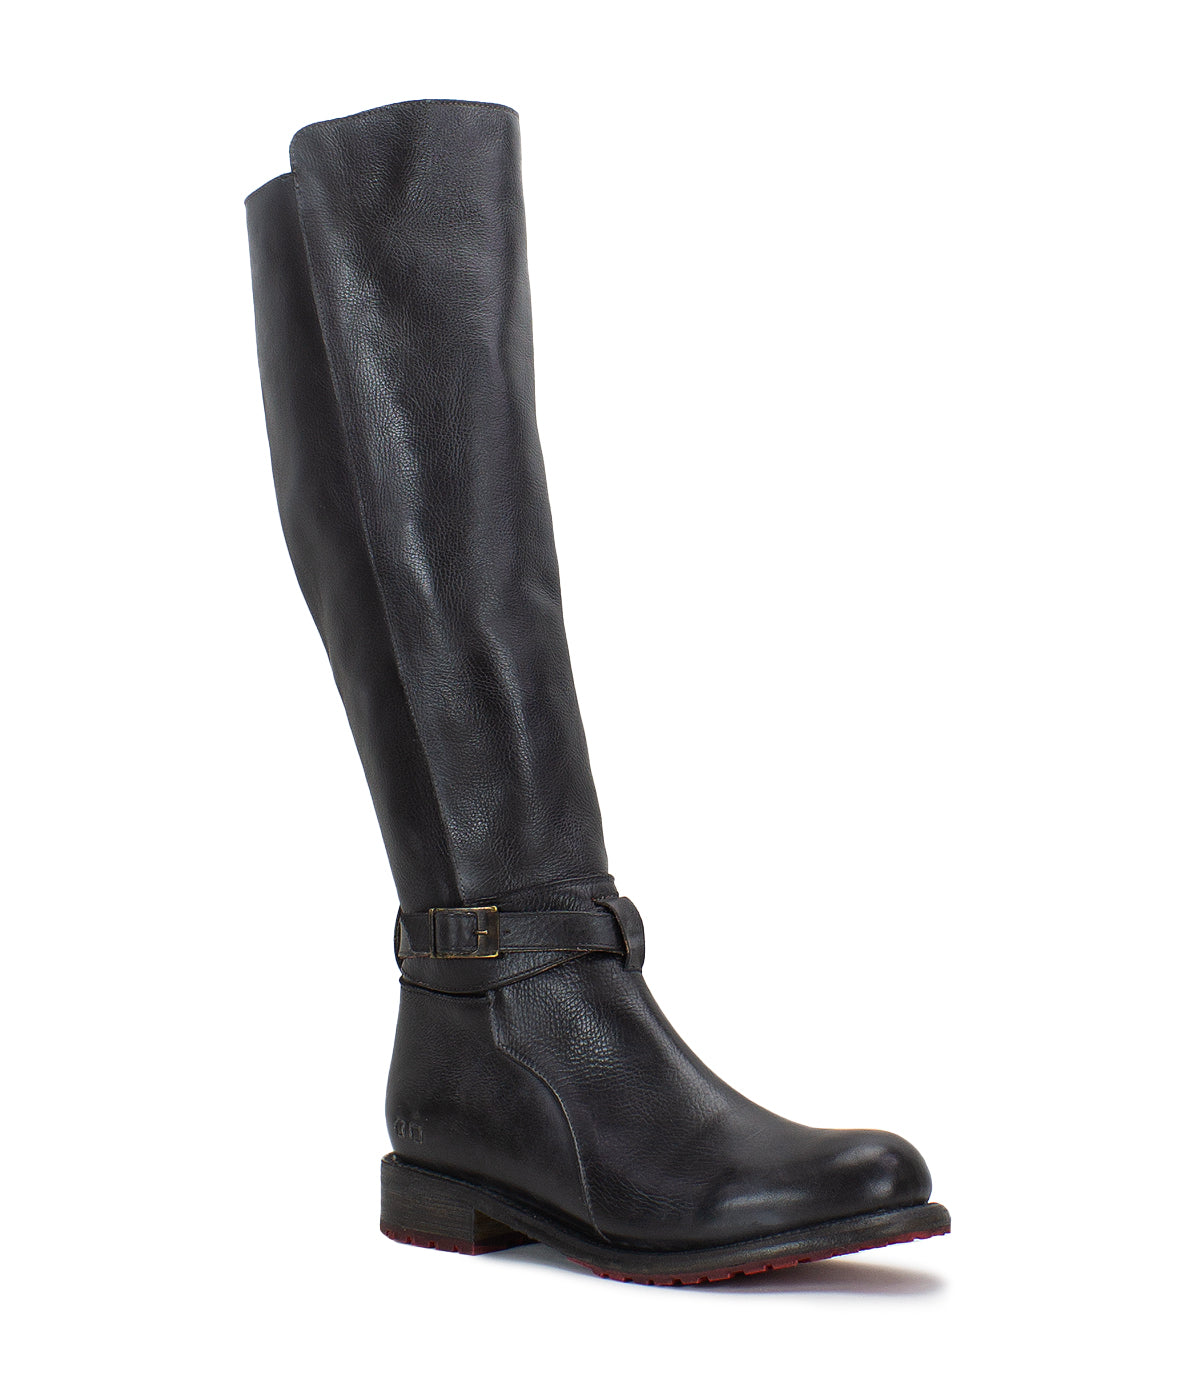 A women's Bristol black leather boot with a buckle on the side, made by Bed Stu.